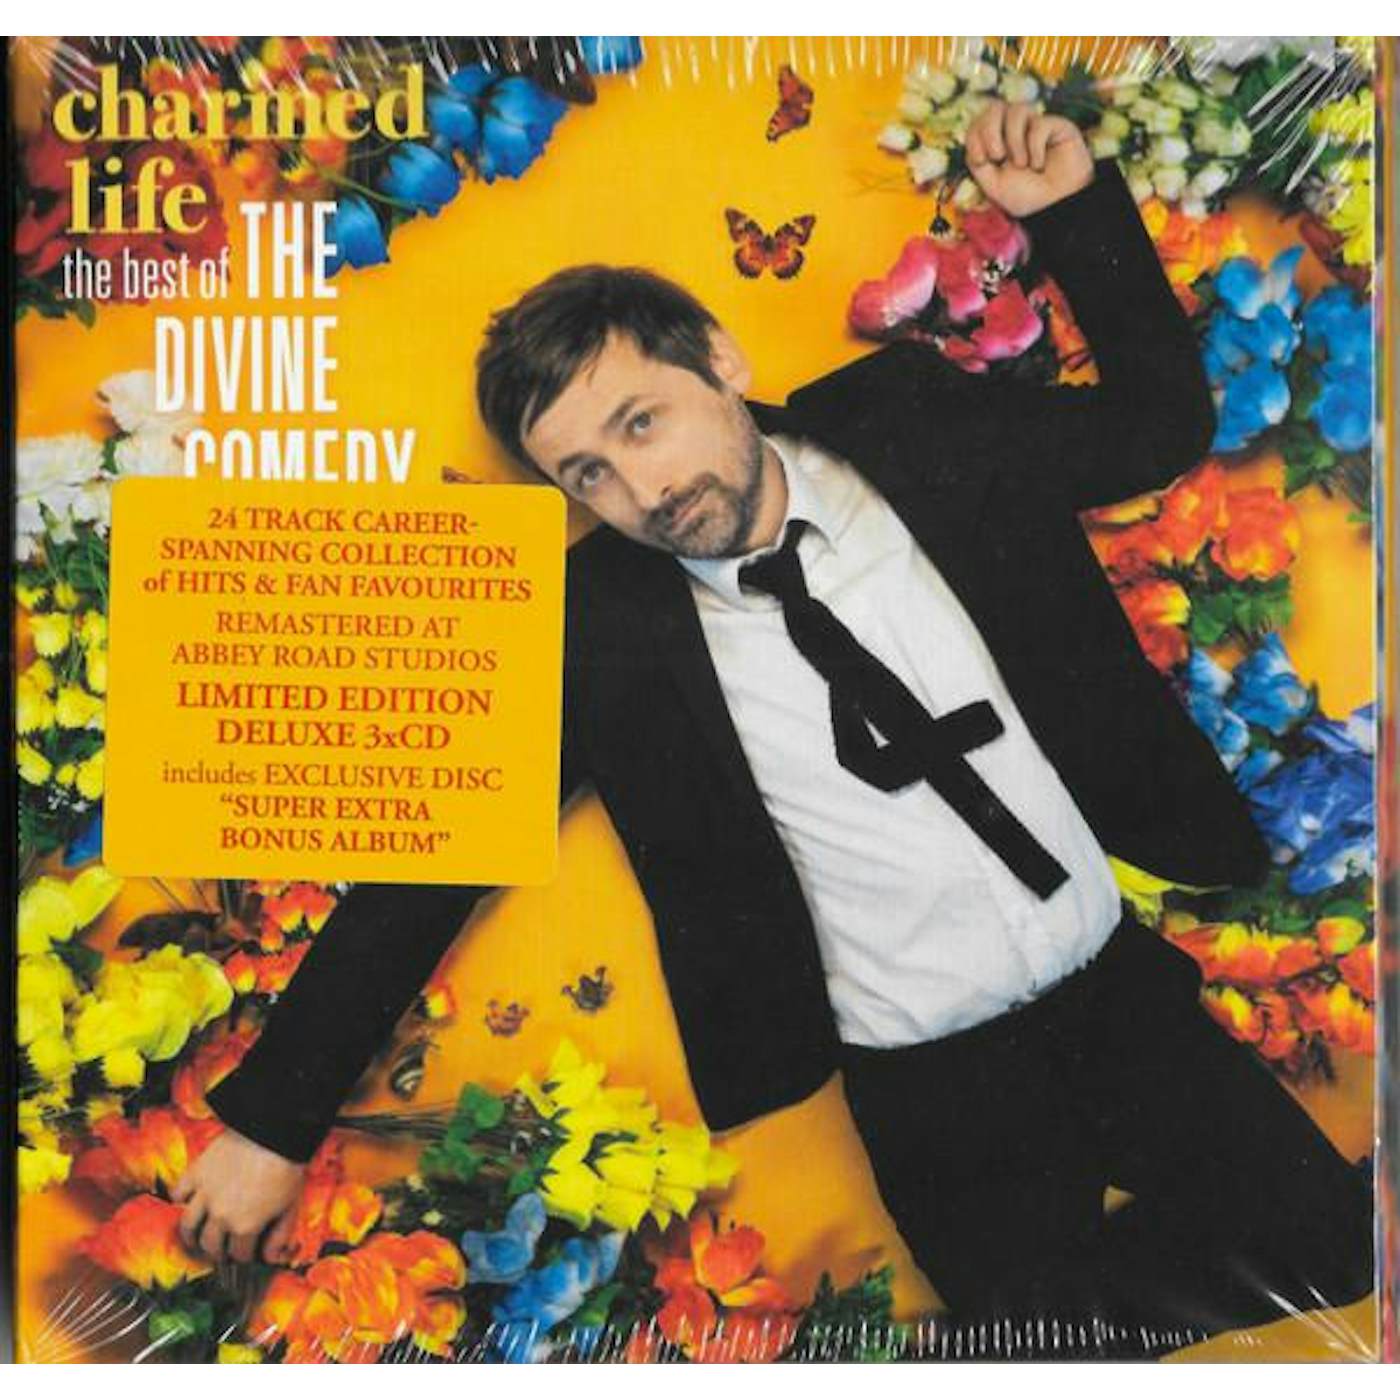 CHARMED LIFE - THE BEST OF THE DIVINE COMEDY CD